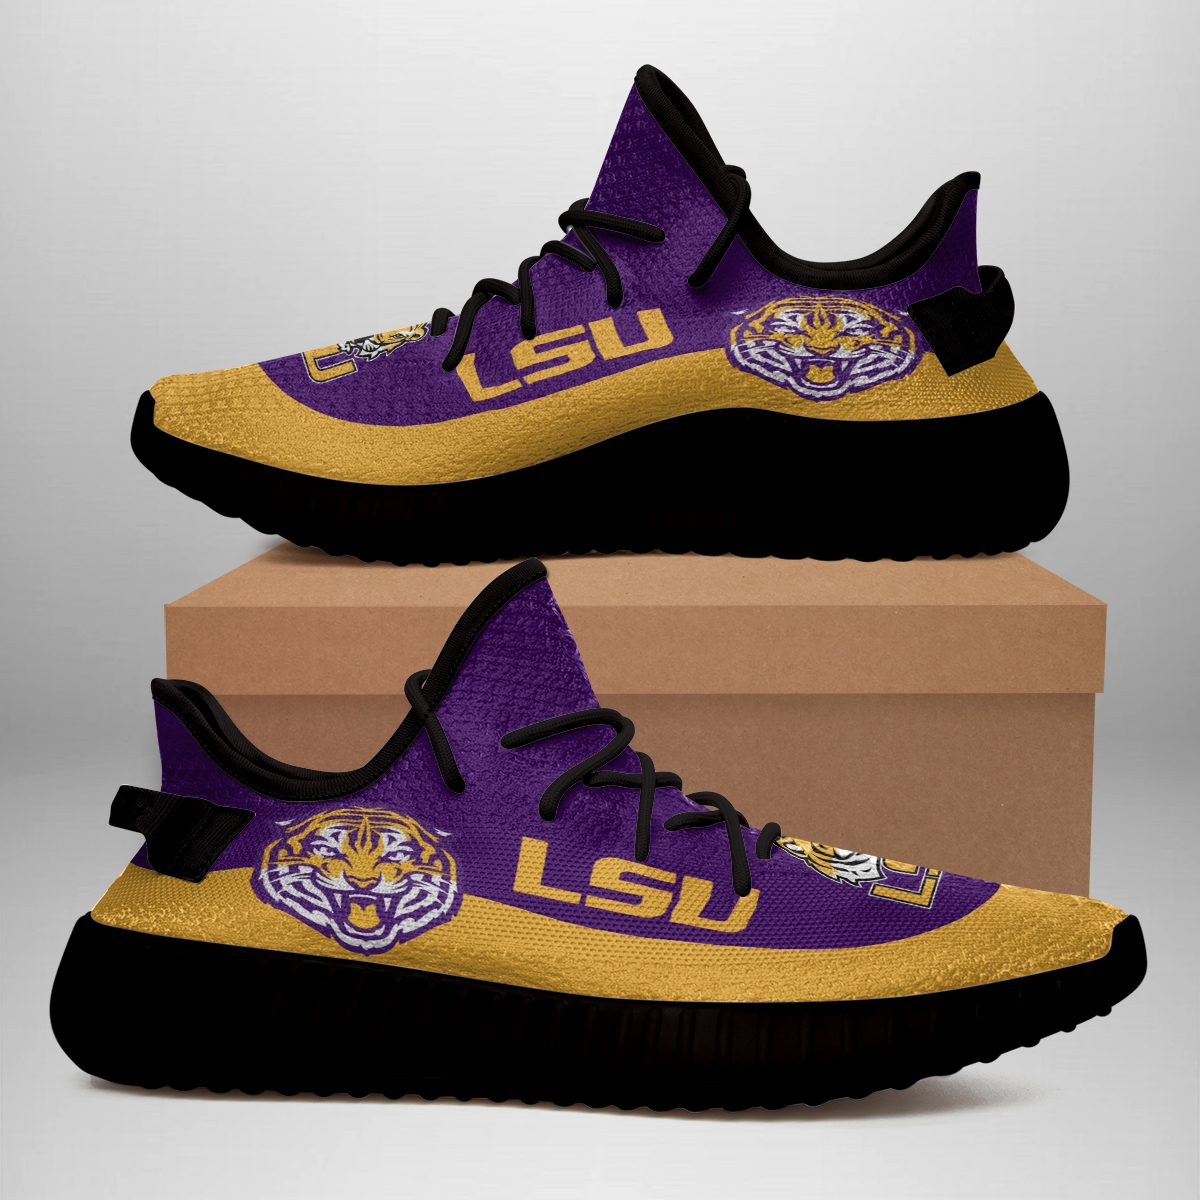 Lsu Tigers Football Shoes Yeezy Shoes